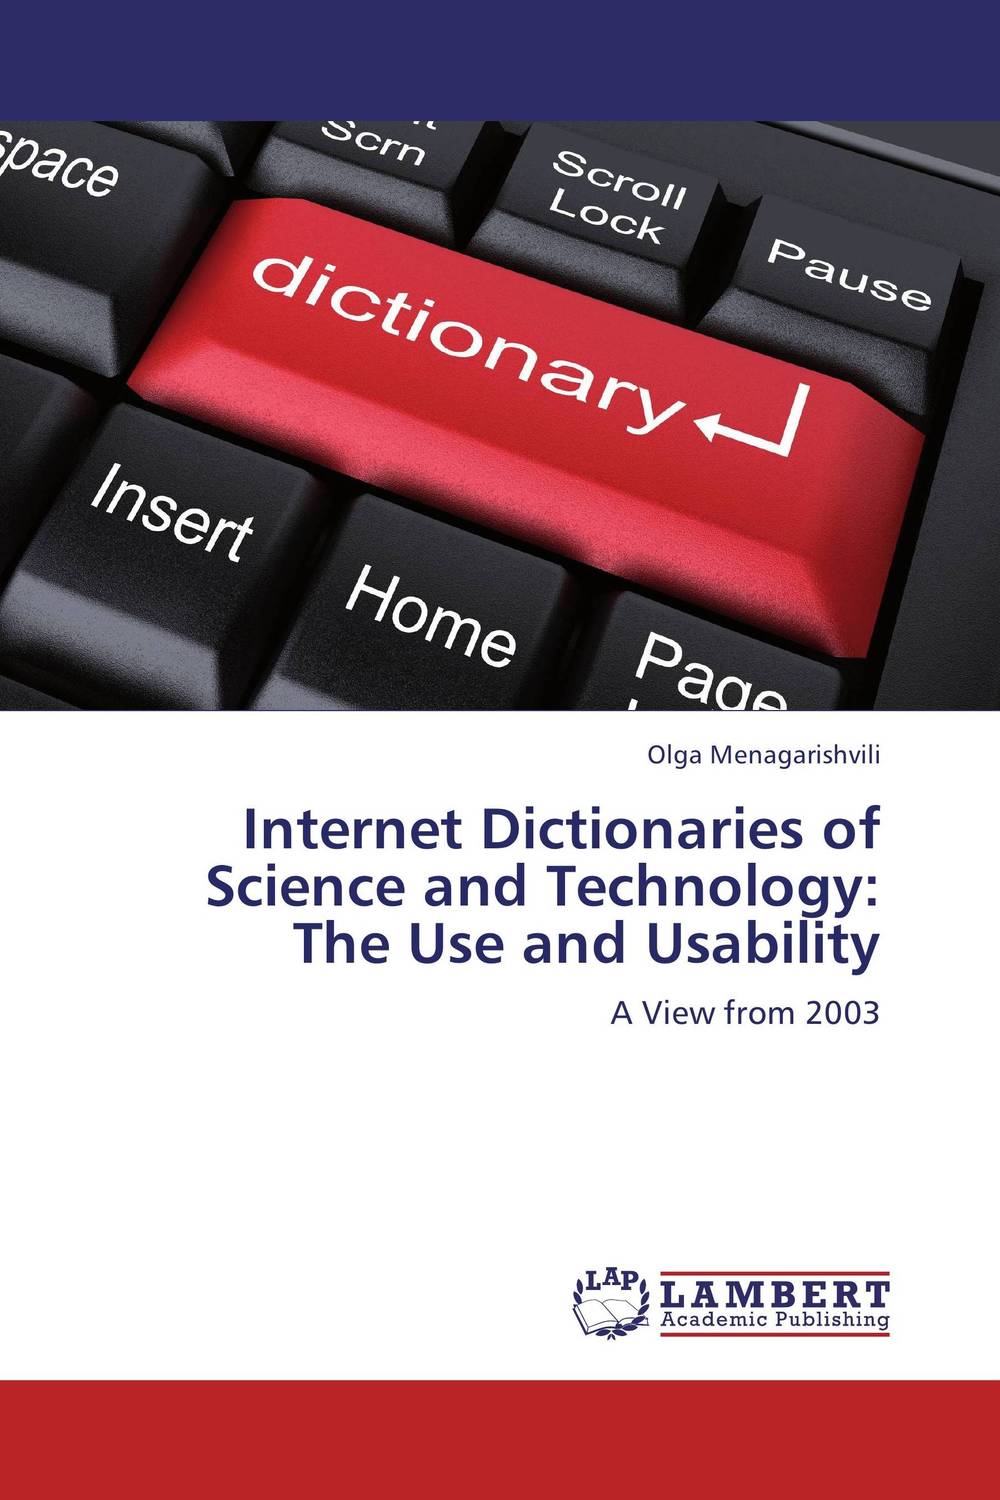 Internet Dictionaries of Science and Technology: The Use and Usability